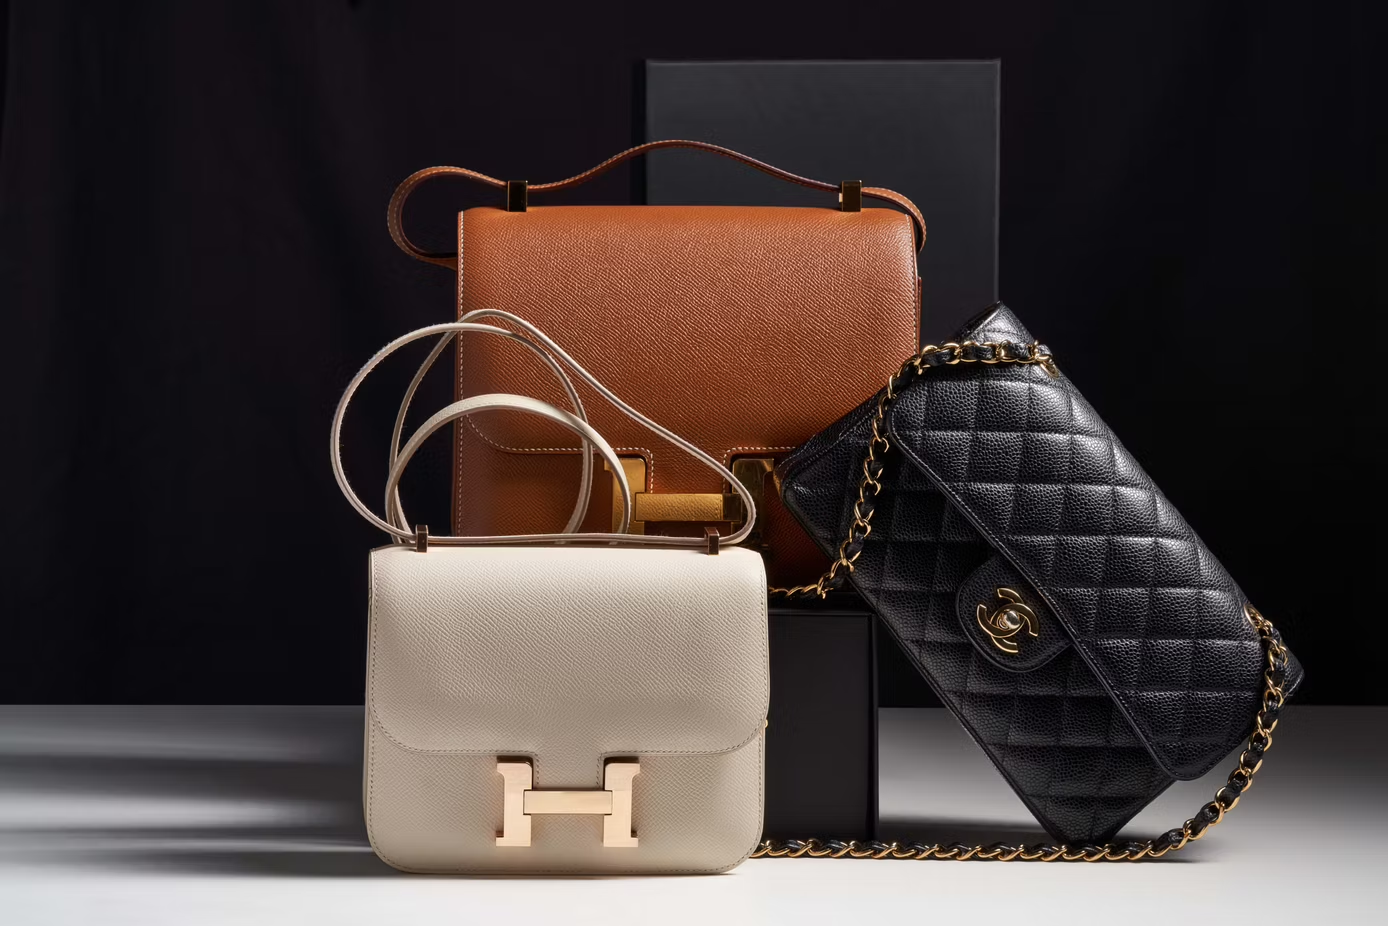 Designer Handbags Are The Most Profitable Luxury Investment Now